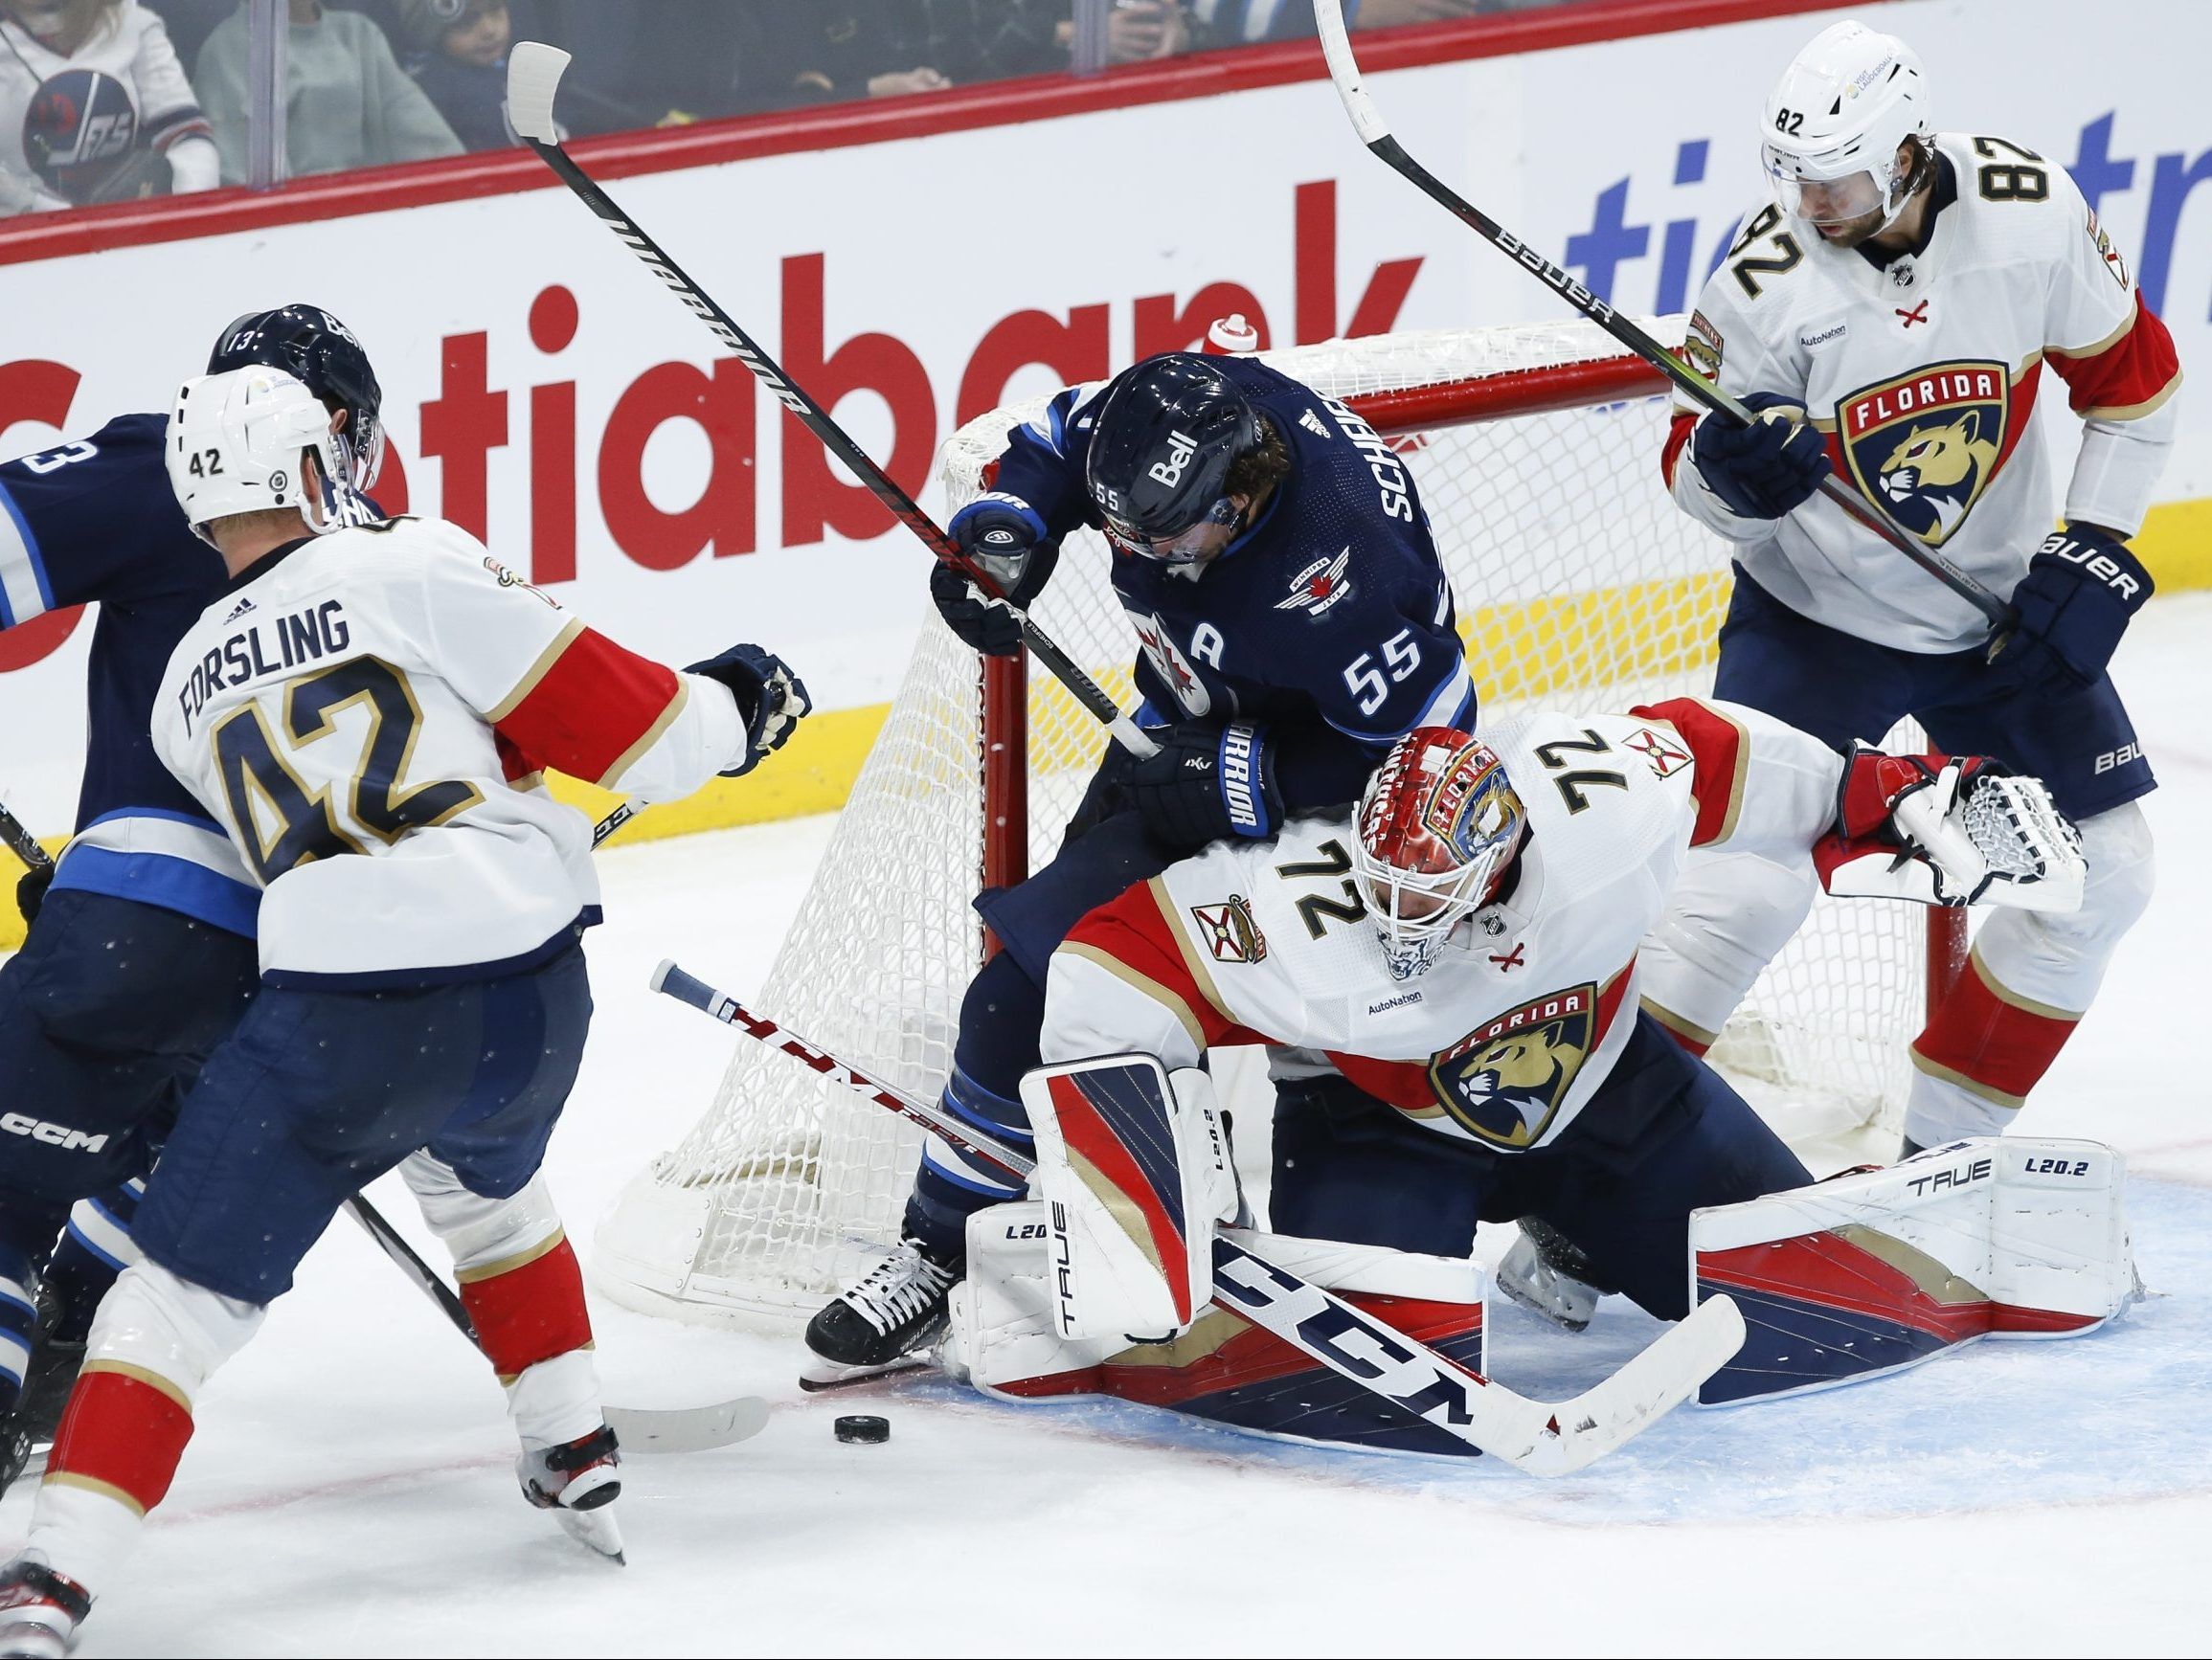 Jets blow out Golden Knights in series opener